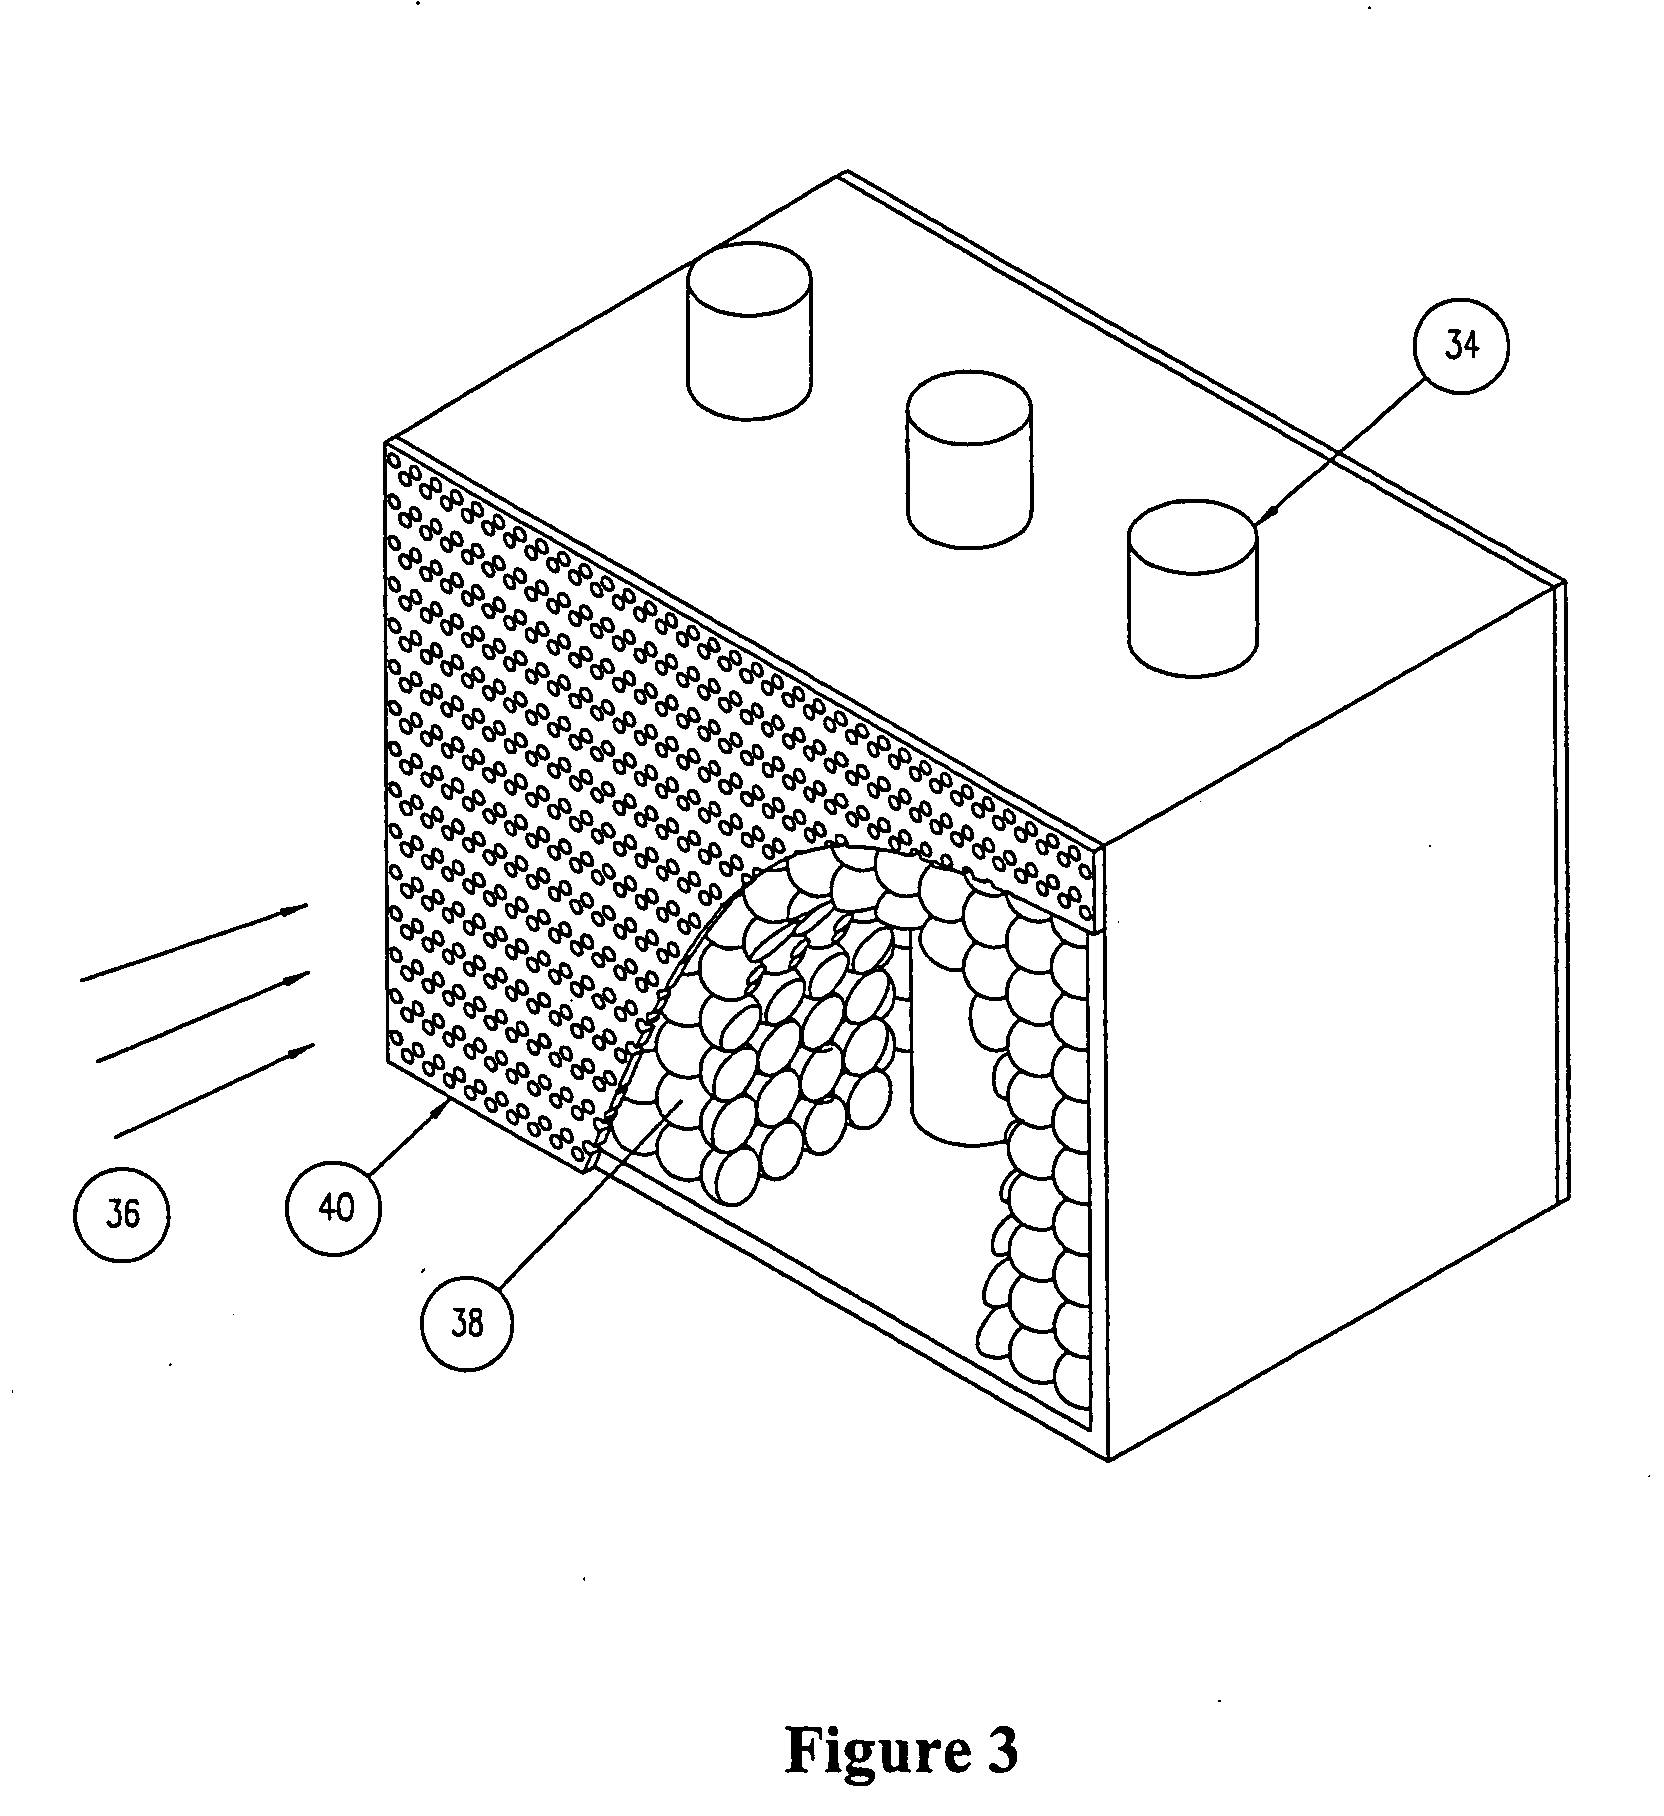 Apparatus and method for photocatalytic purification and disinfection of fluids